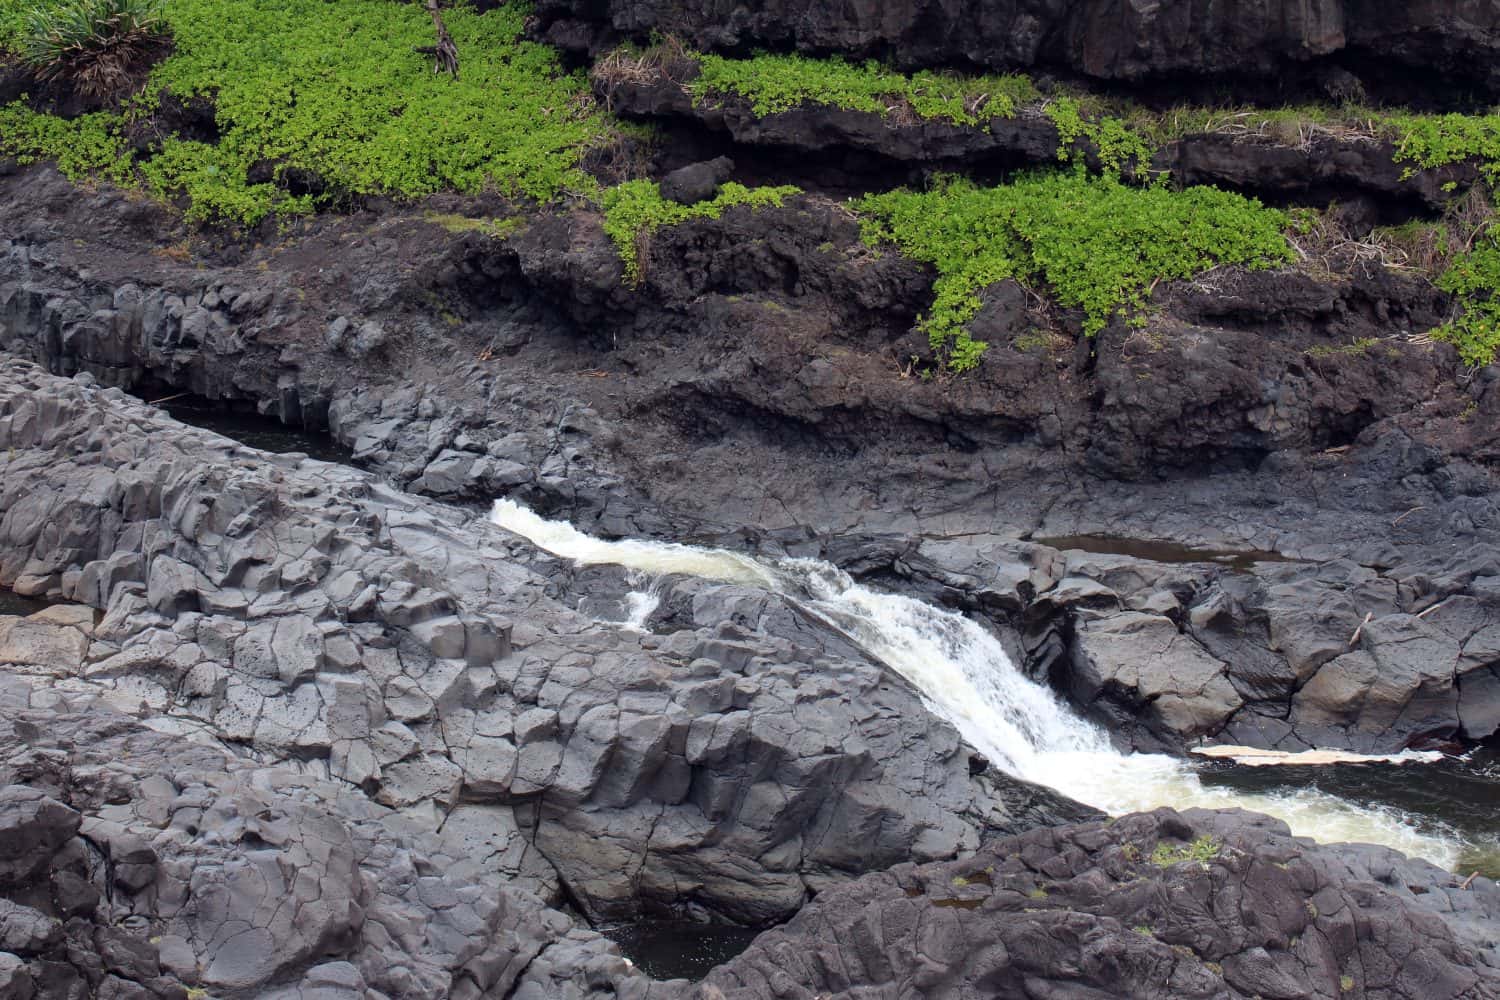 A section of Palikea Stream, Oheo Gulch, Seven Sacred Pools, running through volcani rock with Scaevola taccada plants growing in the rock, Maui, Hawaii, USA